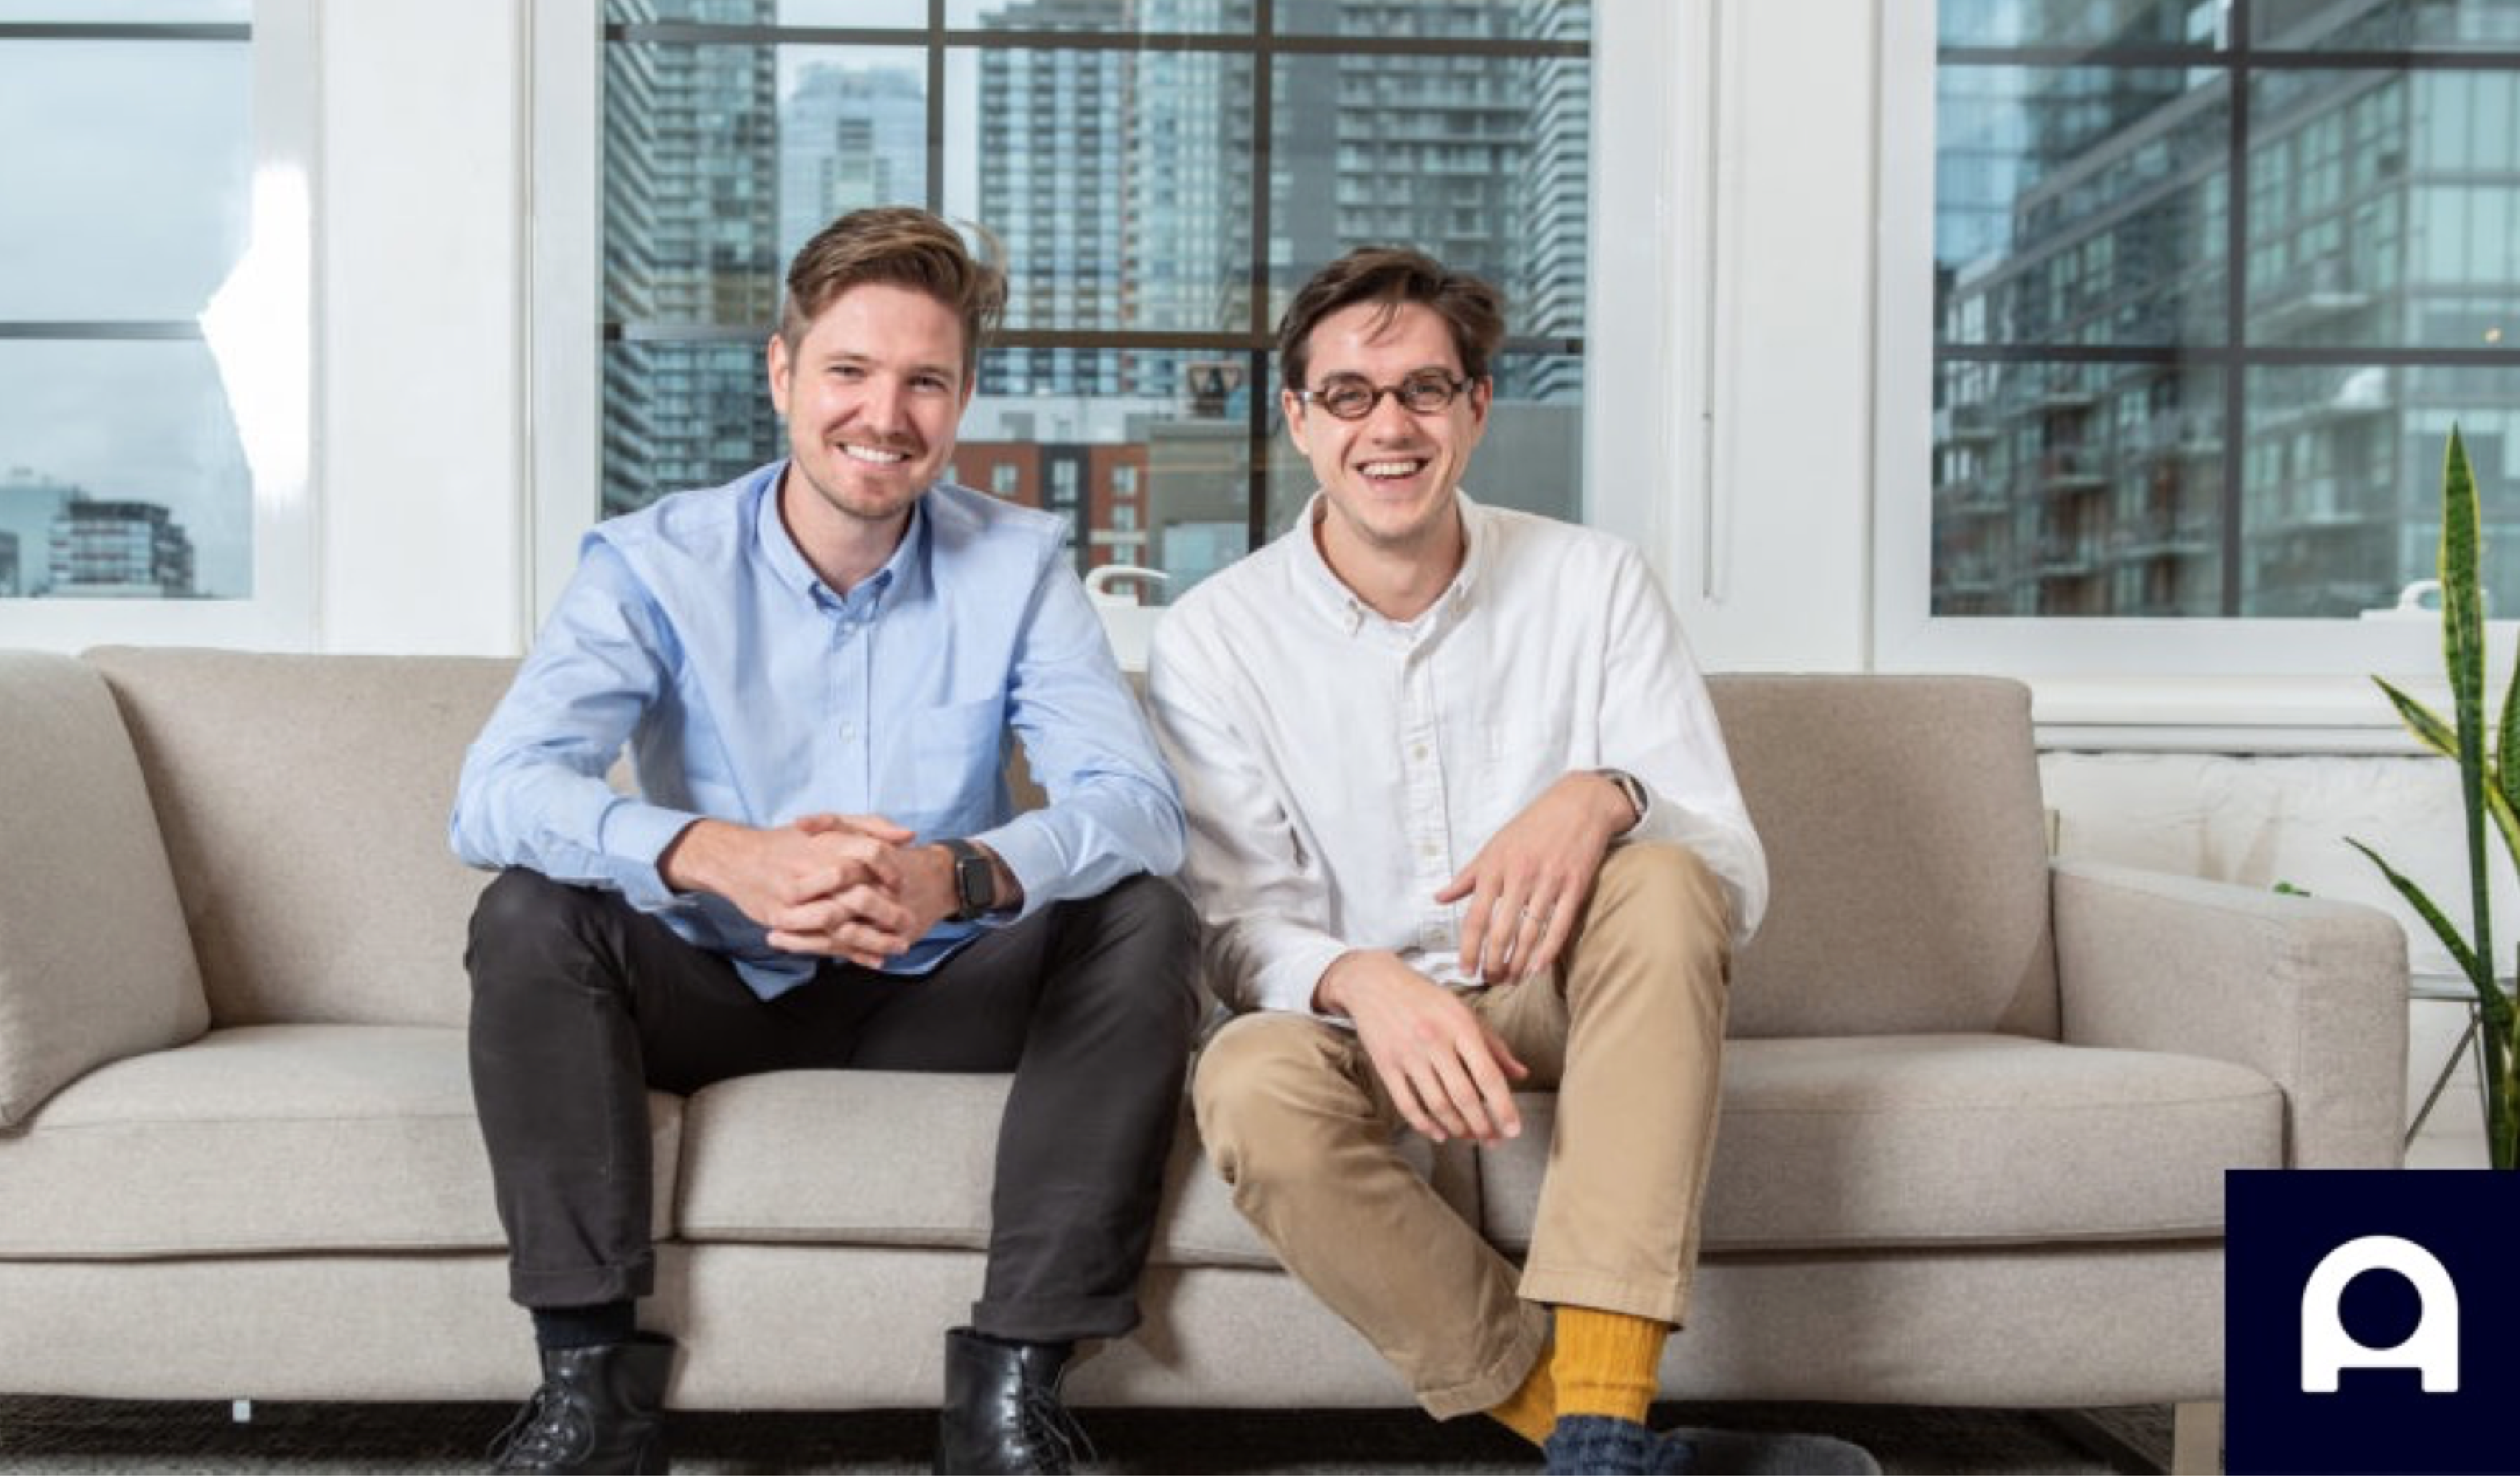 Ada Raises $130M Series C Round at a $1.2B Valuation to Revolutionize the Automated Customer Experience (ACX)